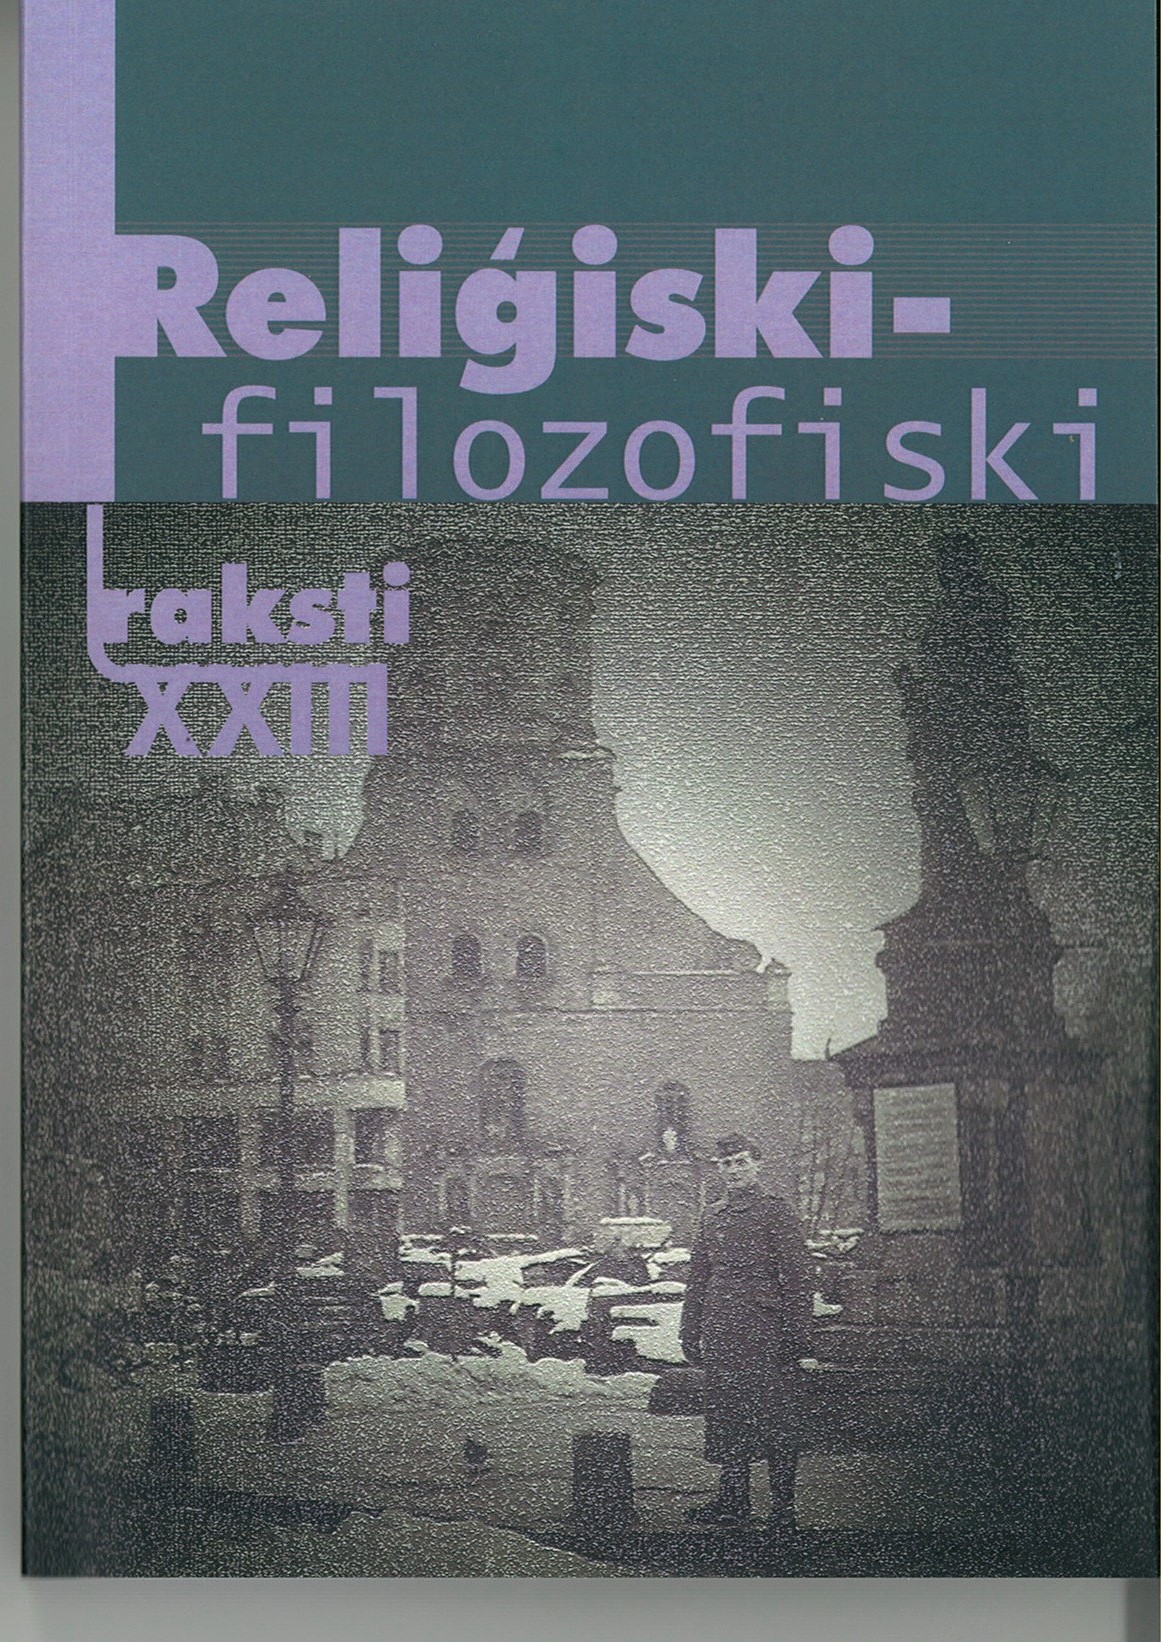 The Activity of the Commission on the History of Religion
of the Communist Academy (Moscow, 1928–1930) and
the Study of Religiosity in USSR Cover Image